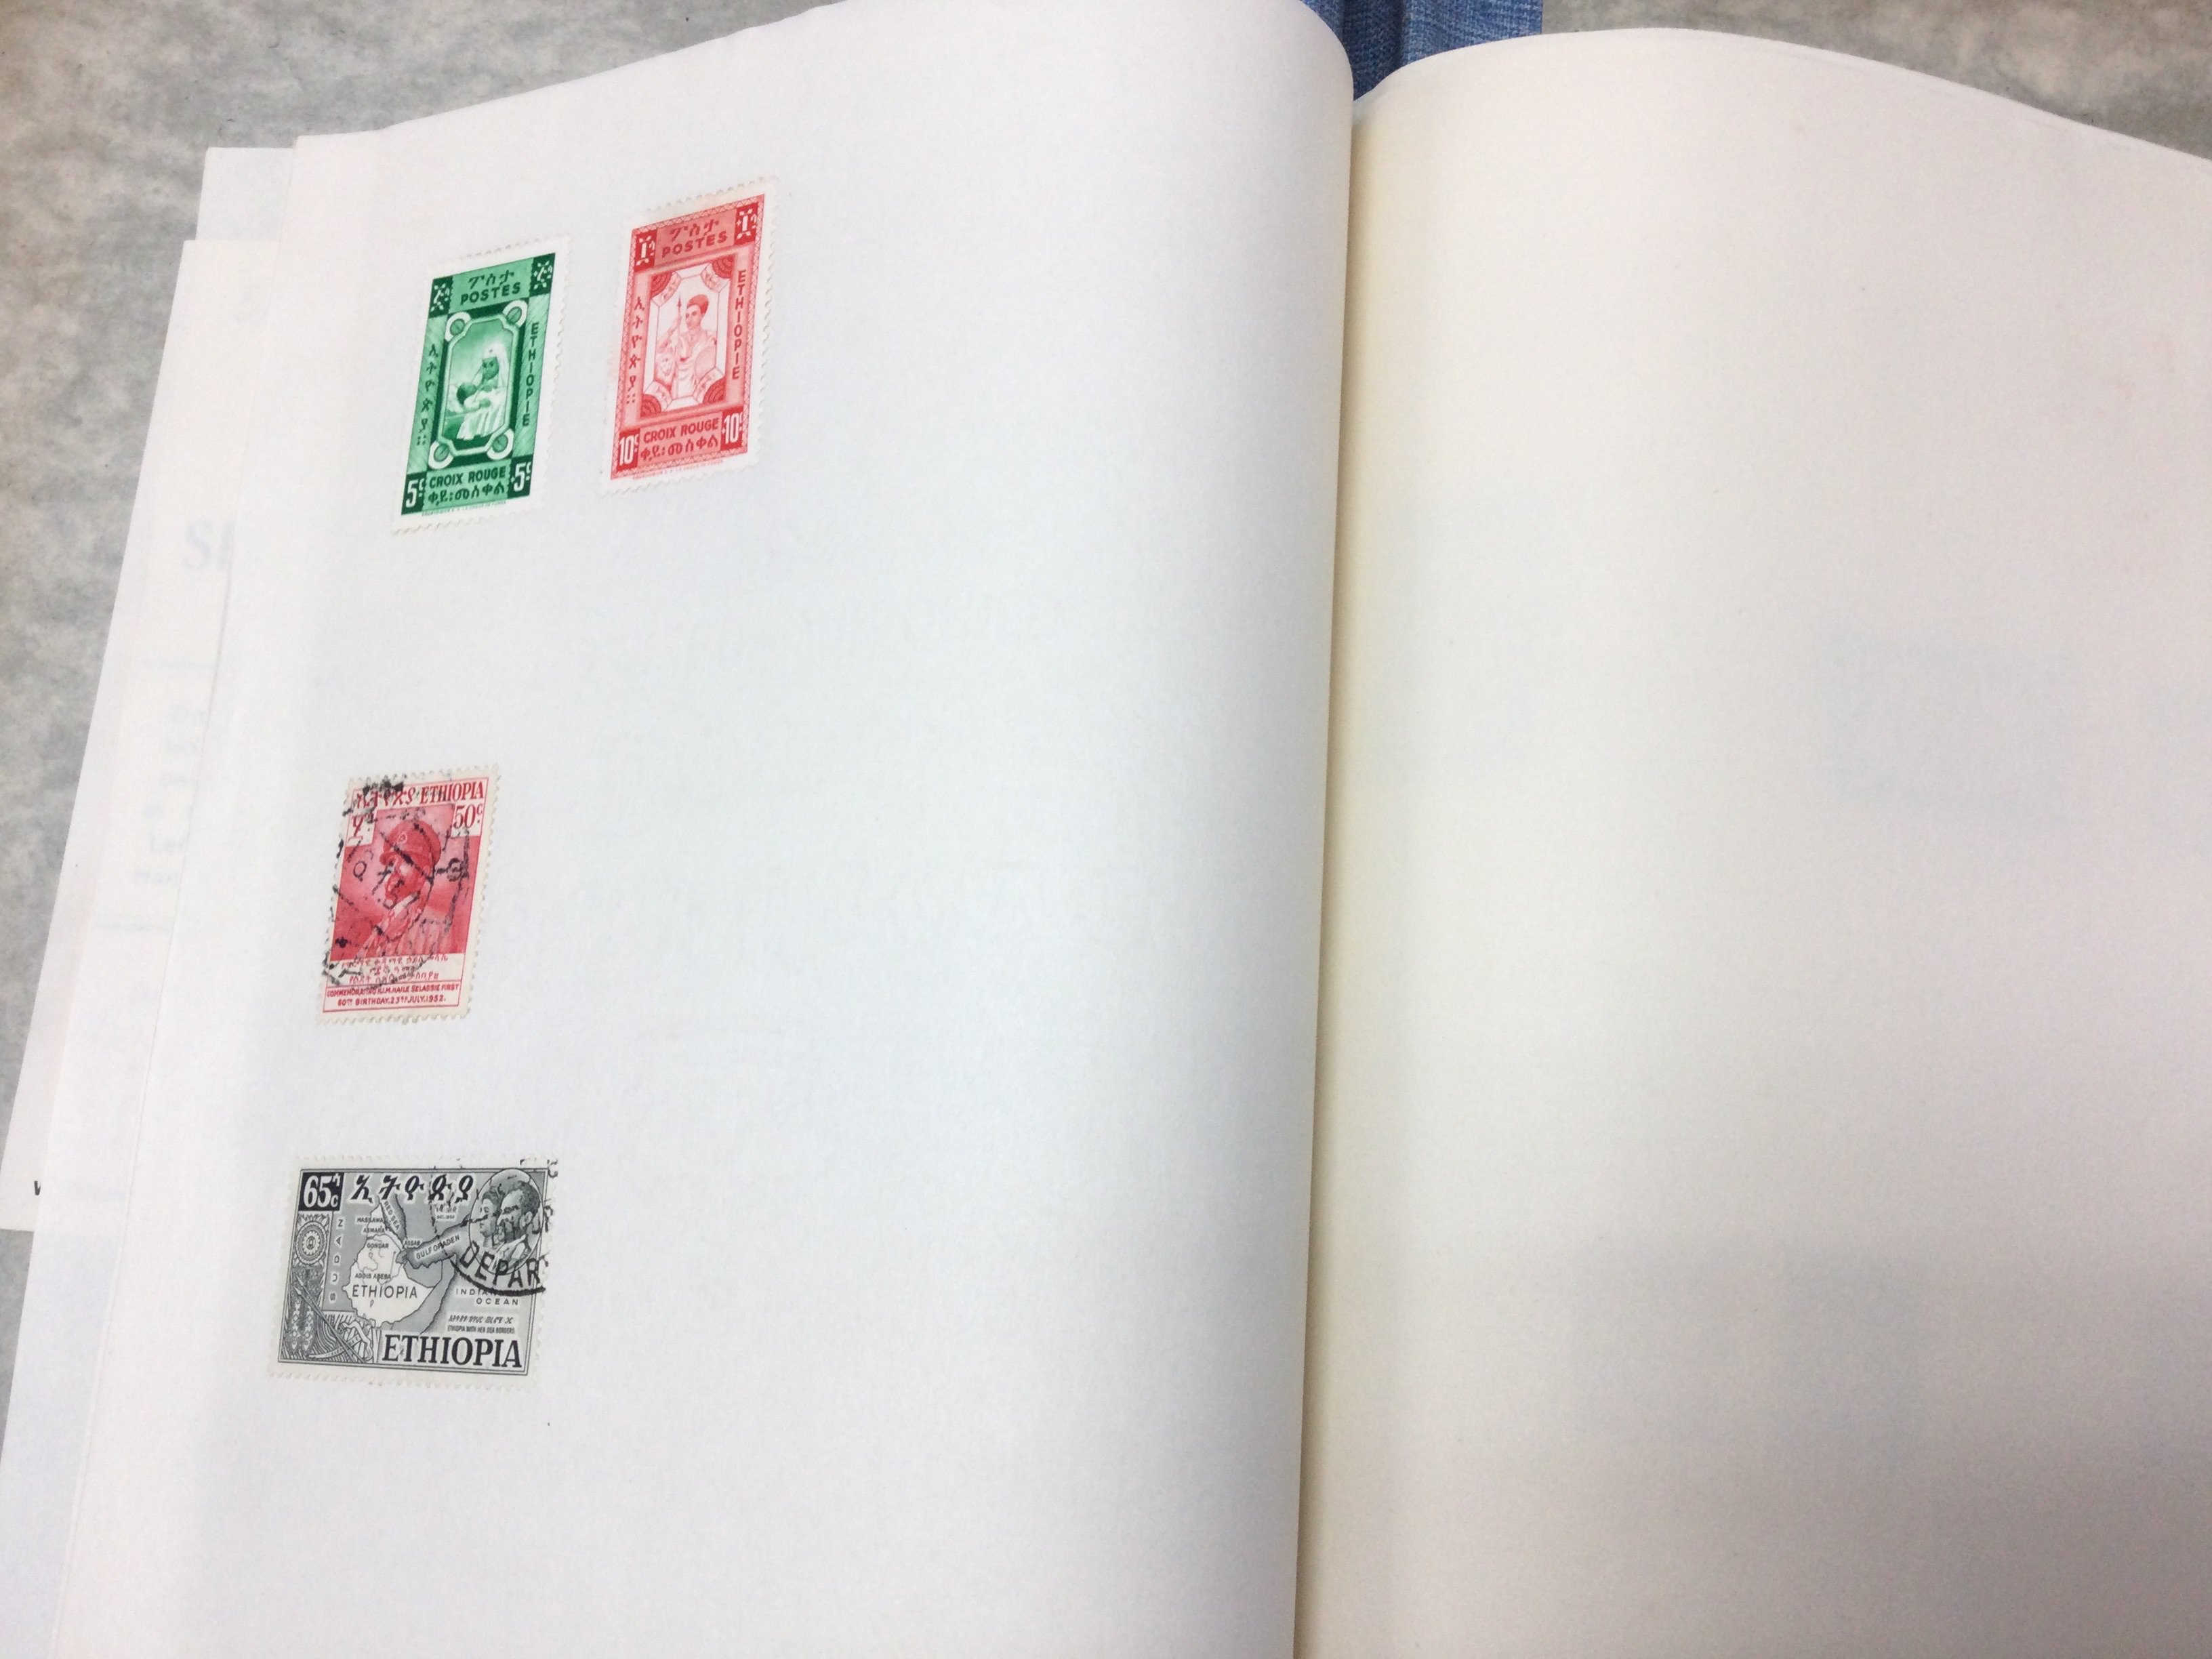 A British & Commonwealth stamp album, postage cate - Image 4 of 10